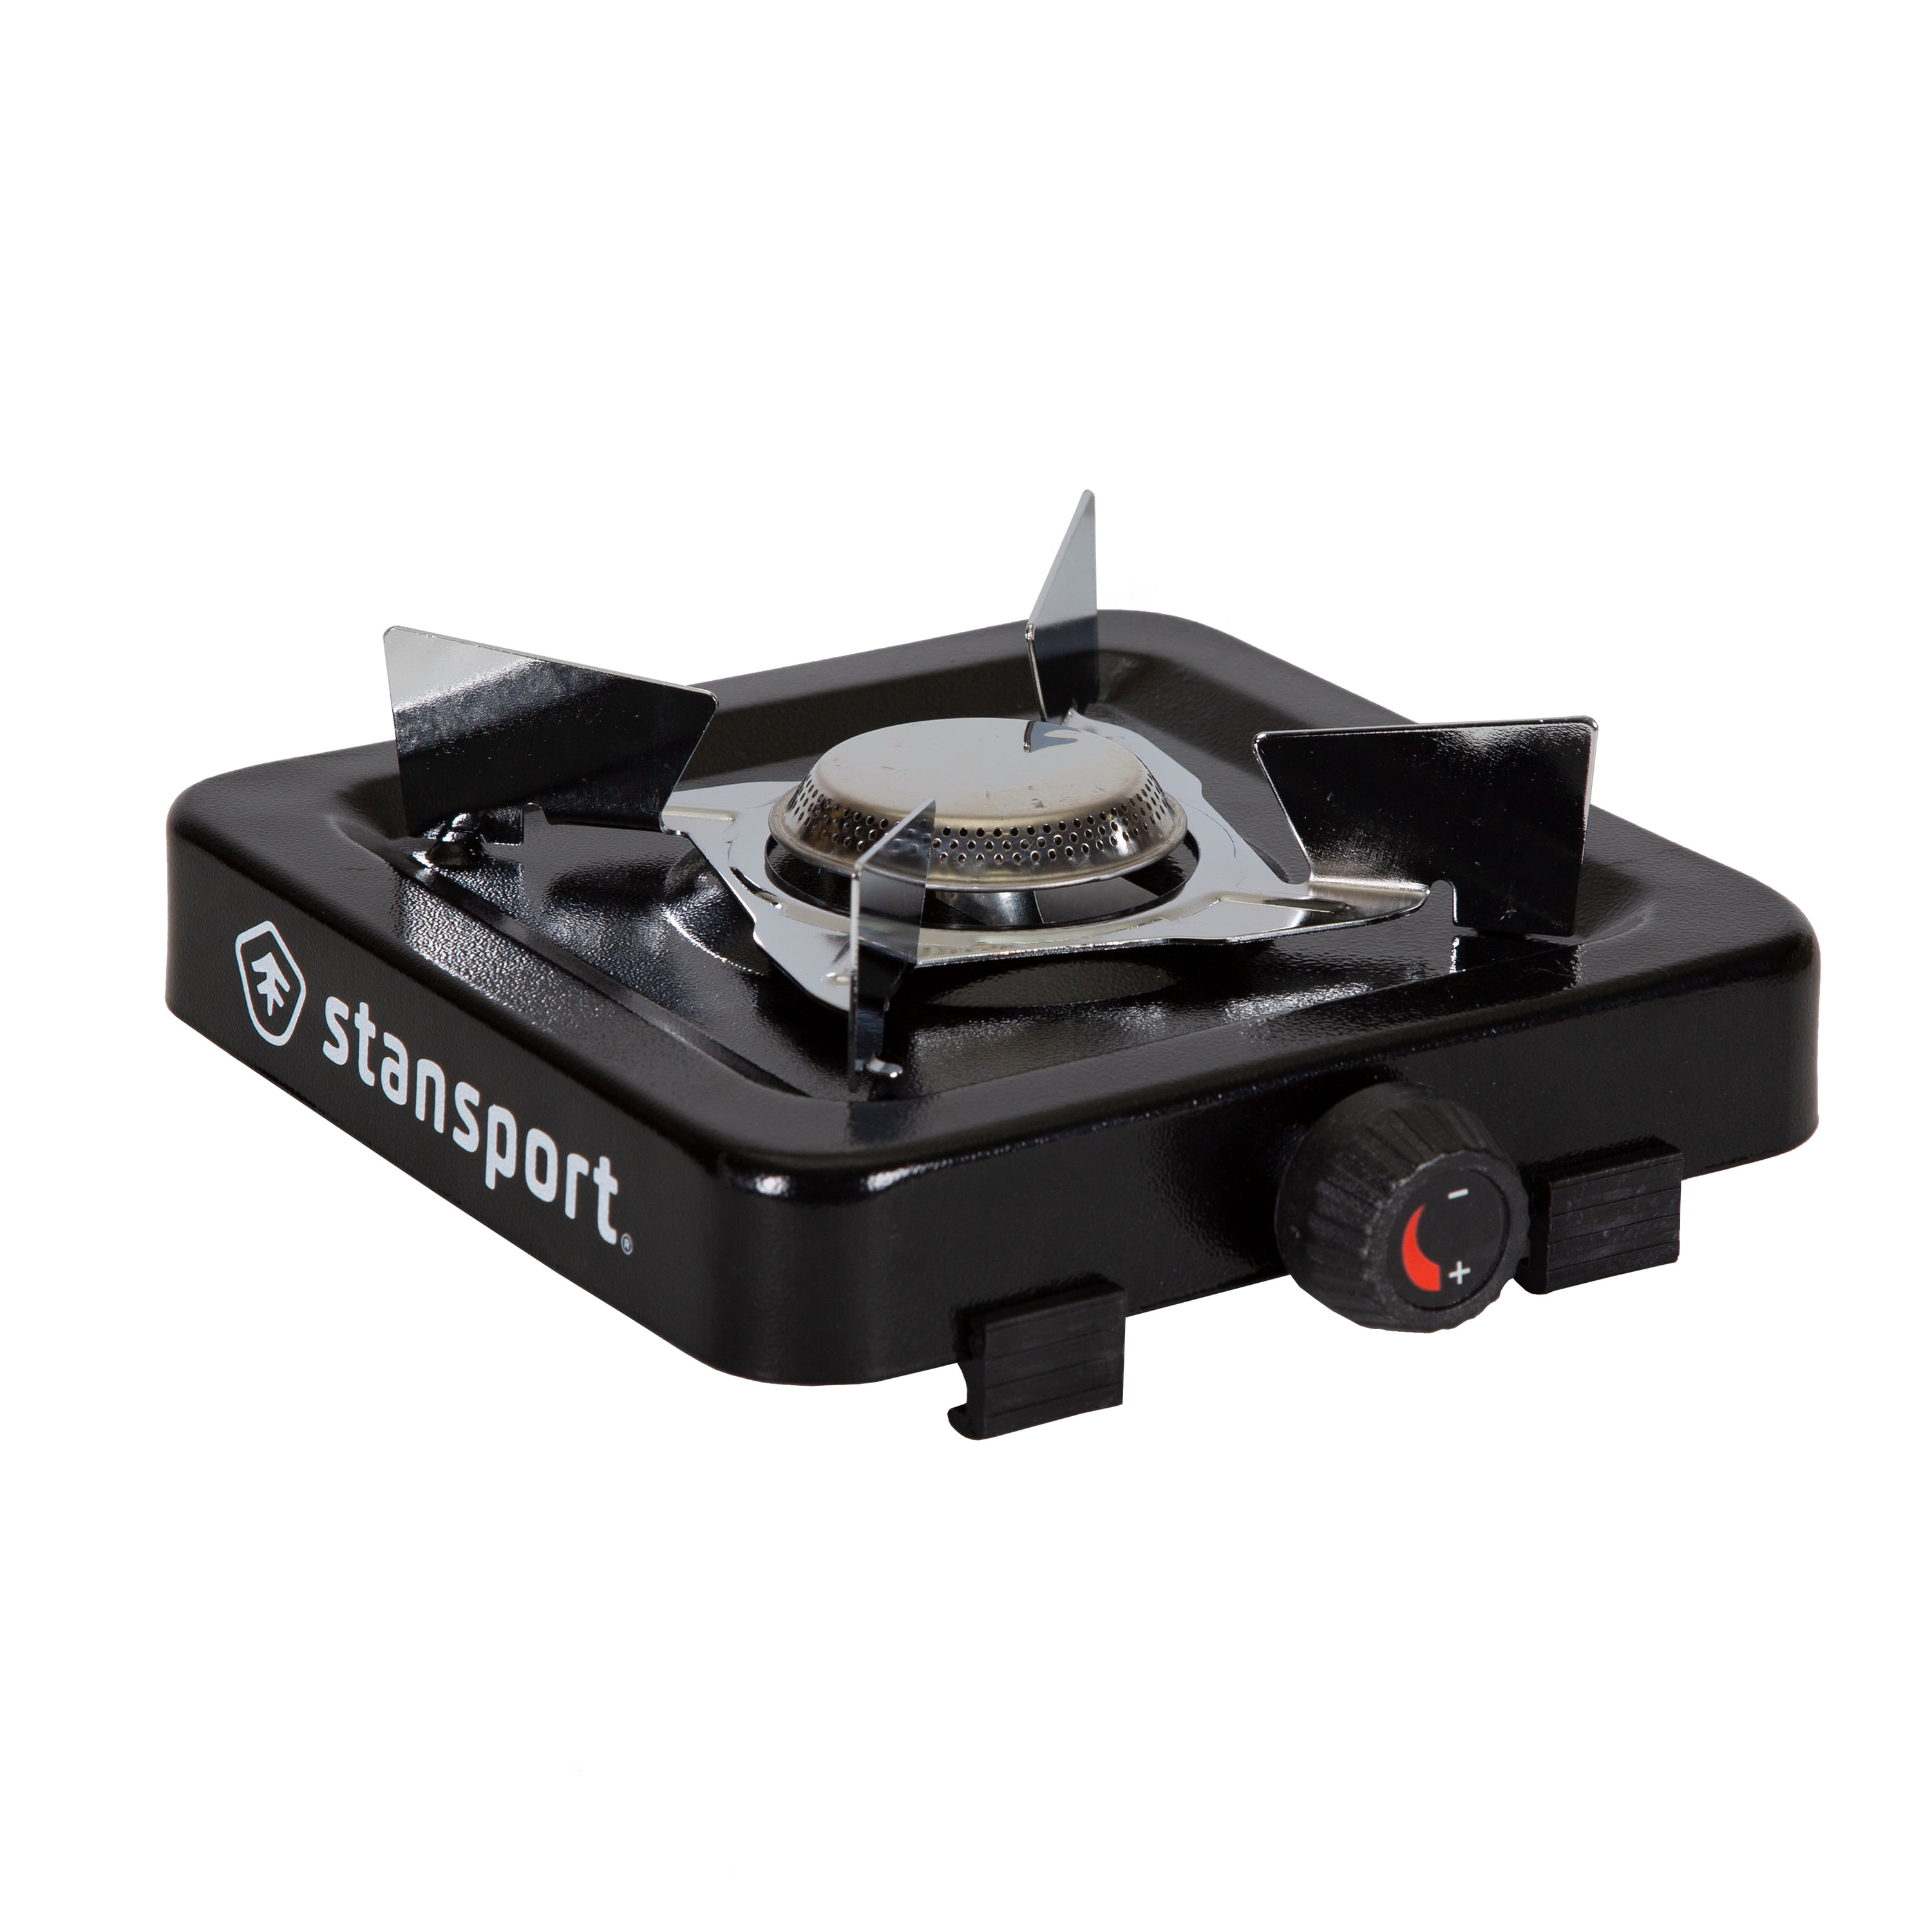 Modern Stansport 2 Burner Propane Stove for Small Space